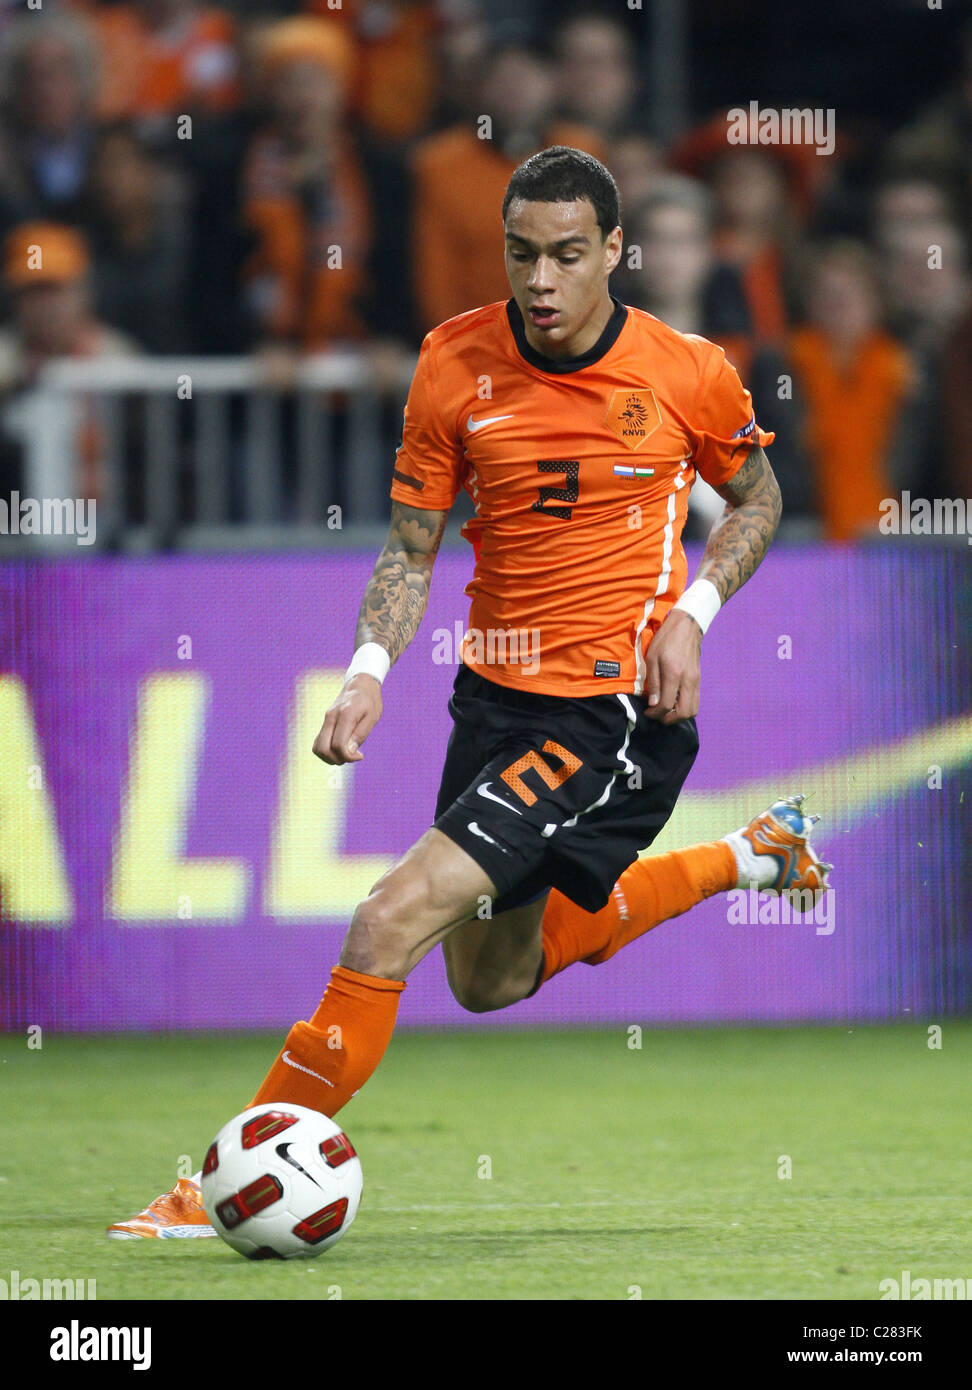 Gregory van der Wiel of the Netherlands eyes the ball during a